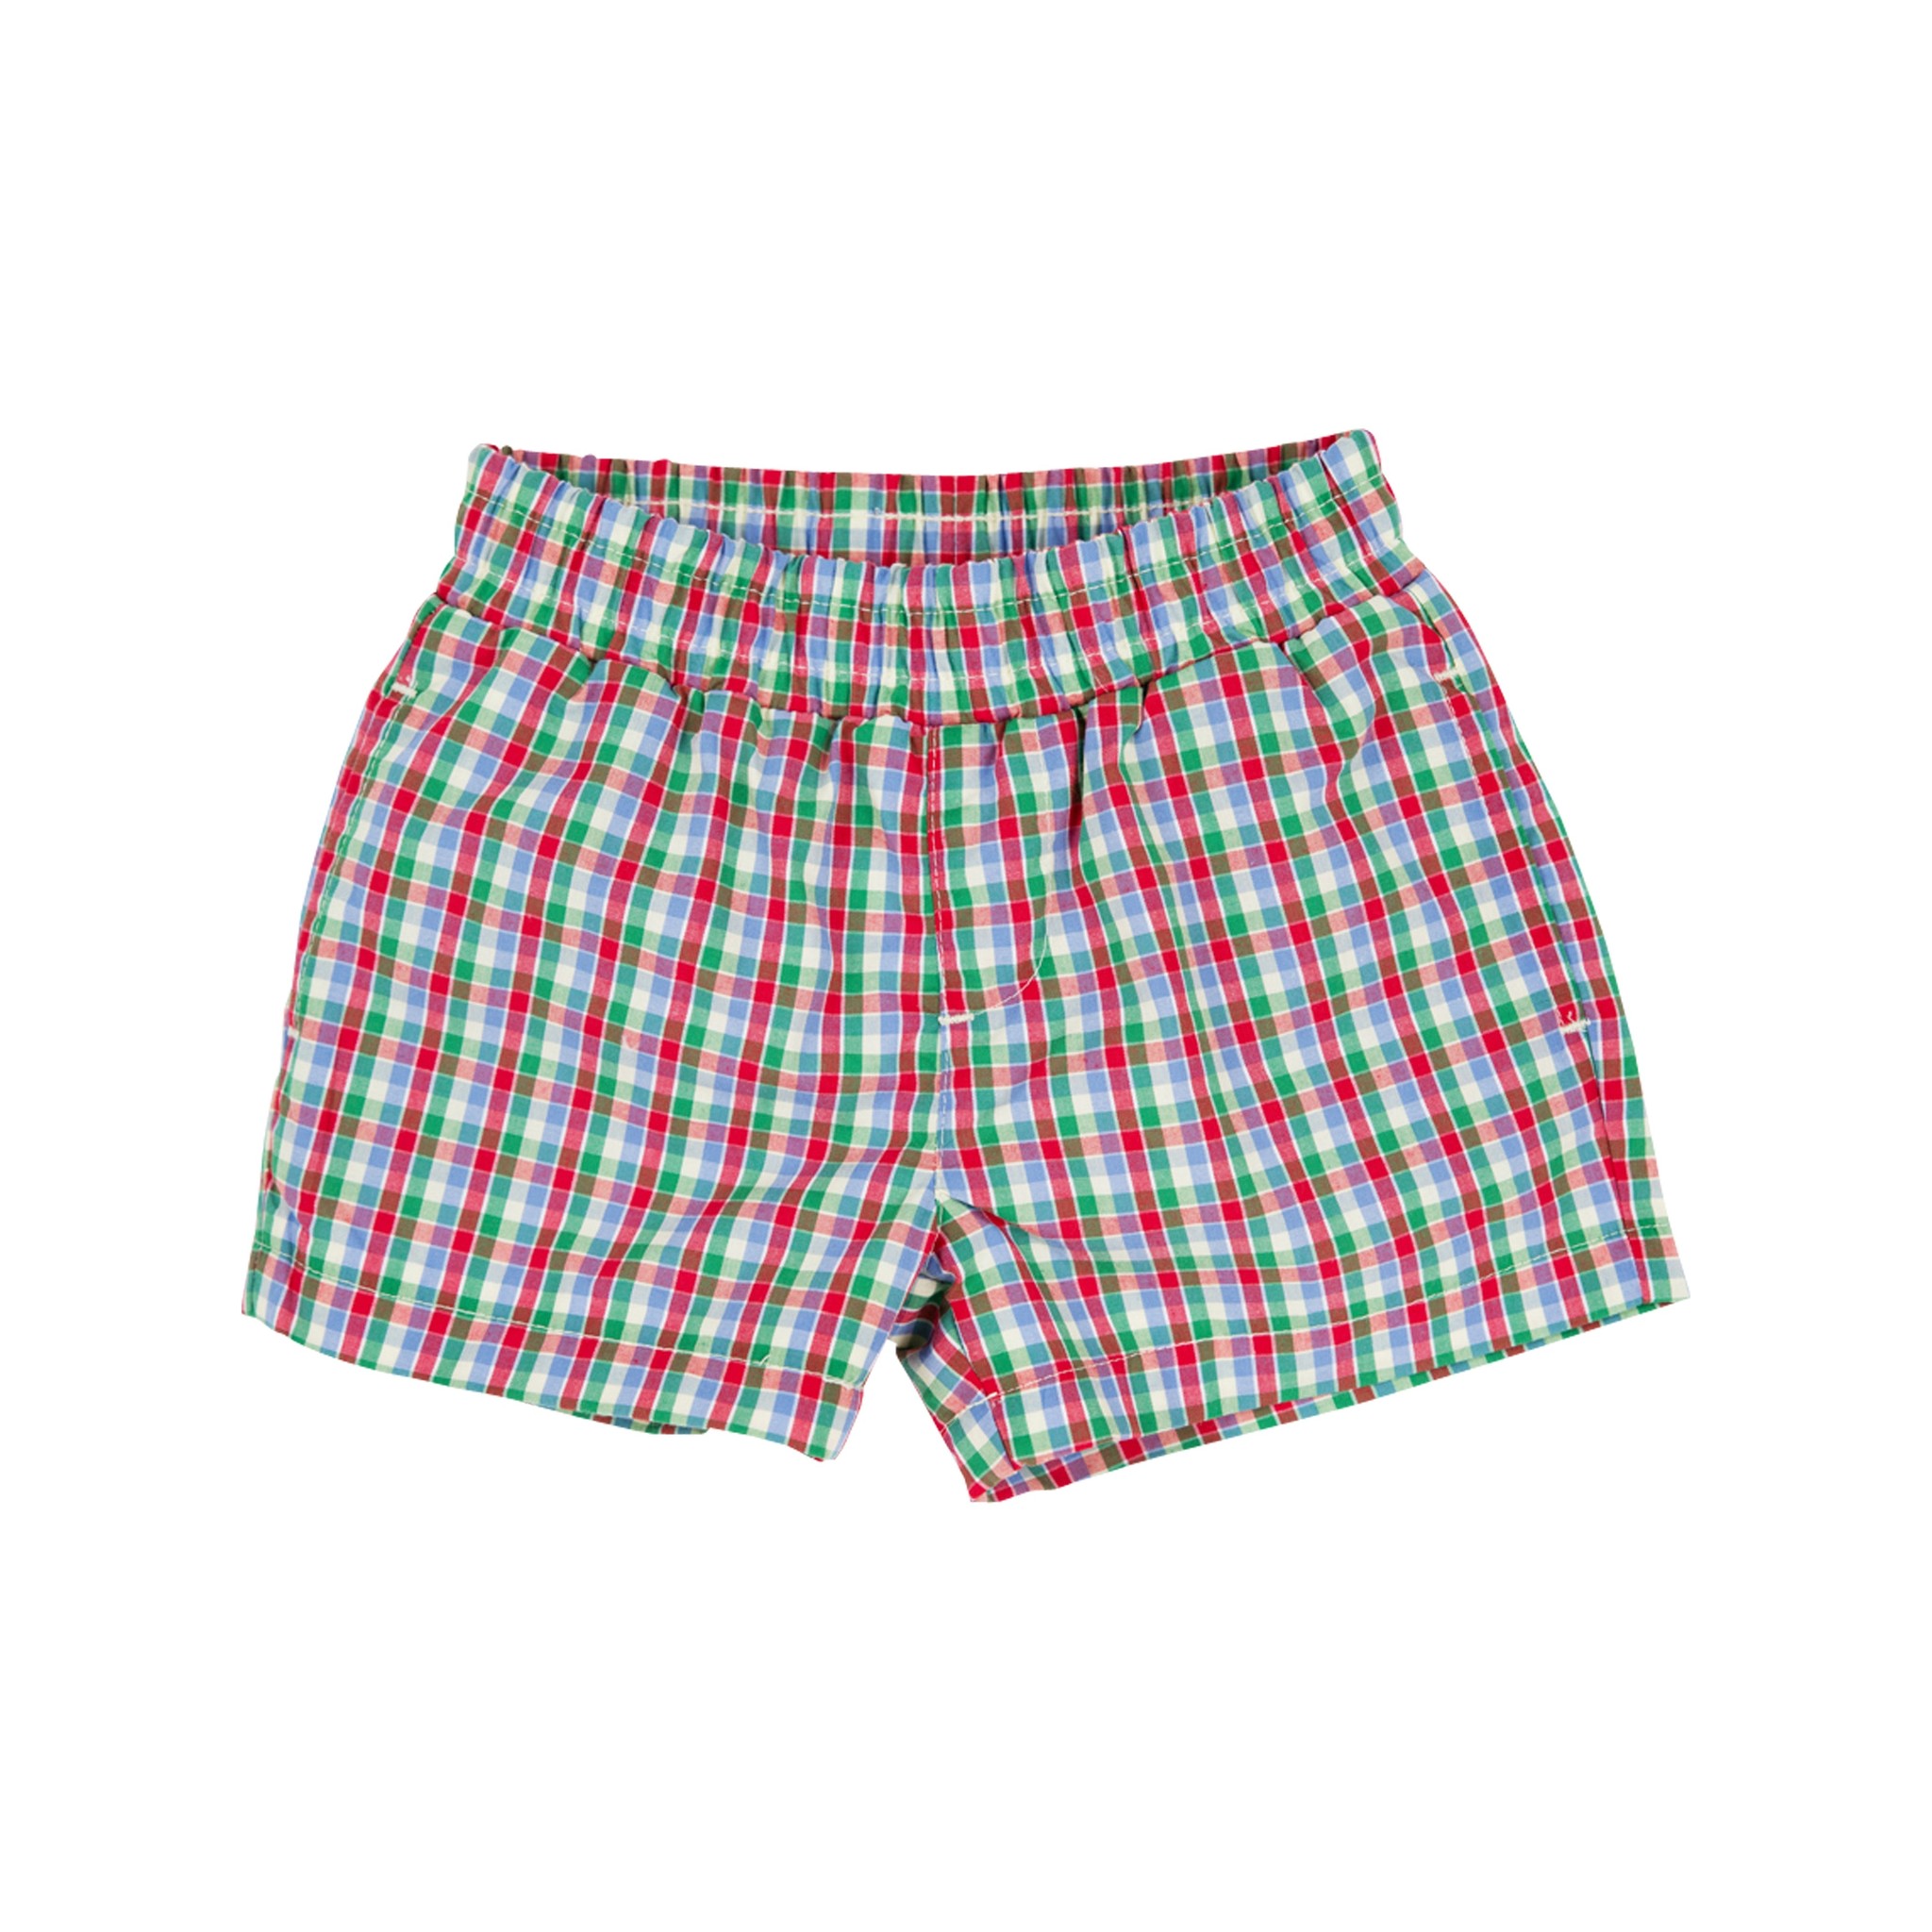 TBBC Sheffield Shorts Miss Porter's Plaid - Spoiled Sweet Boutique ...